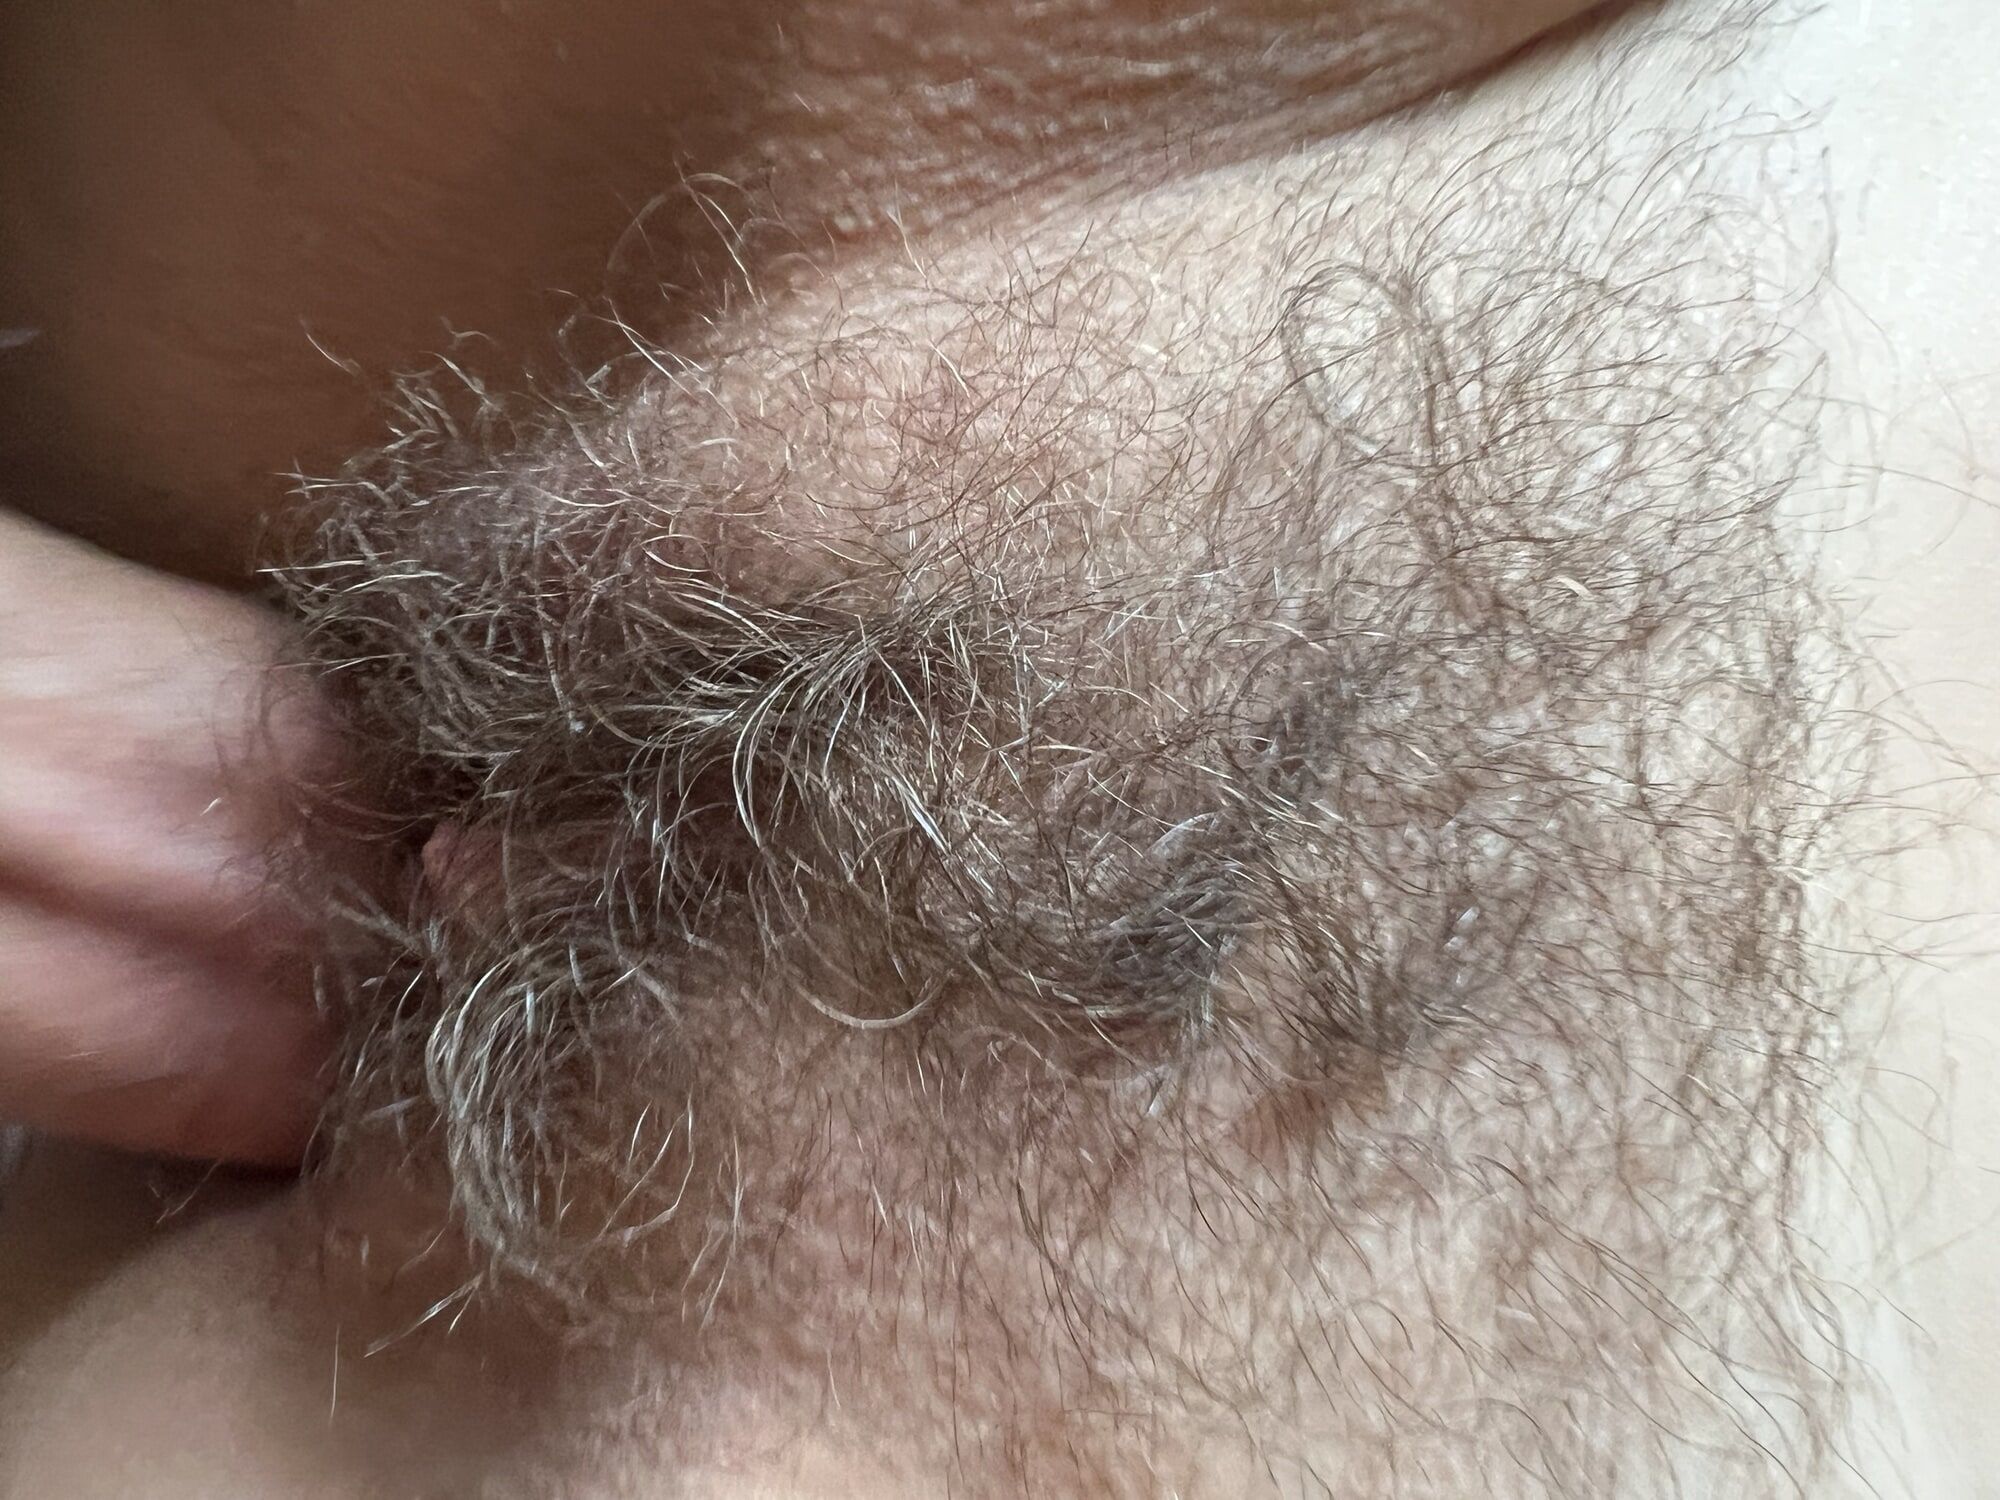 Wife exposed, hairy amateur wife posing and teasing  #4